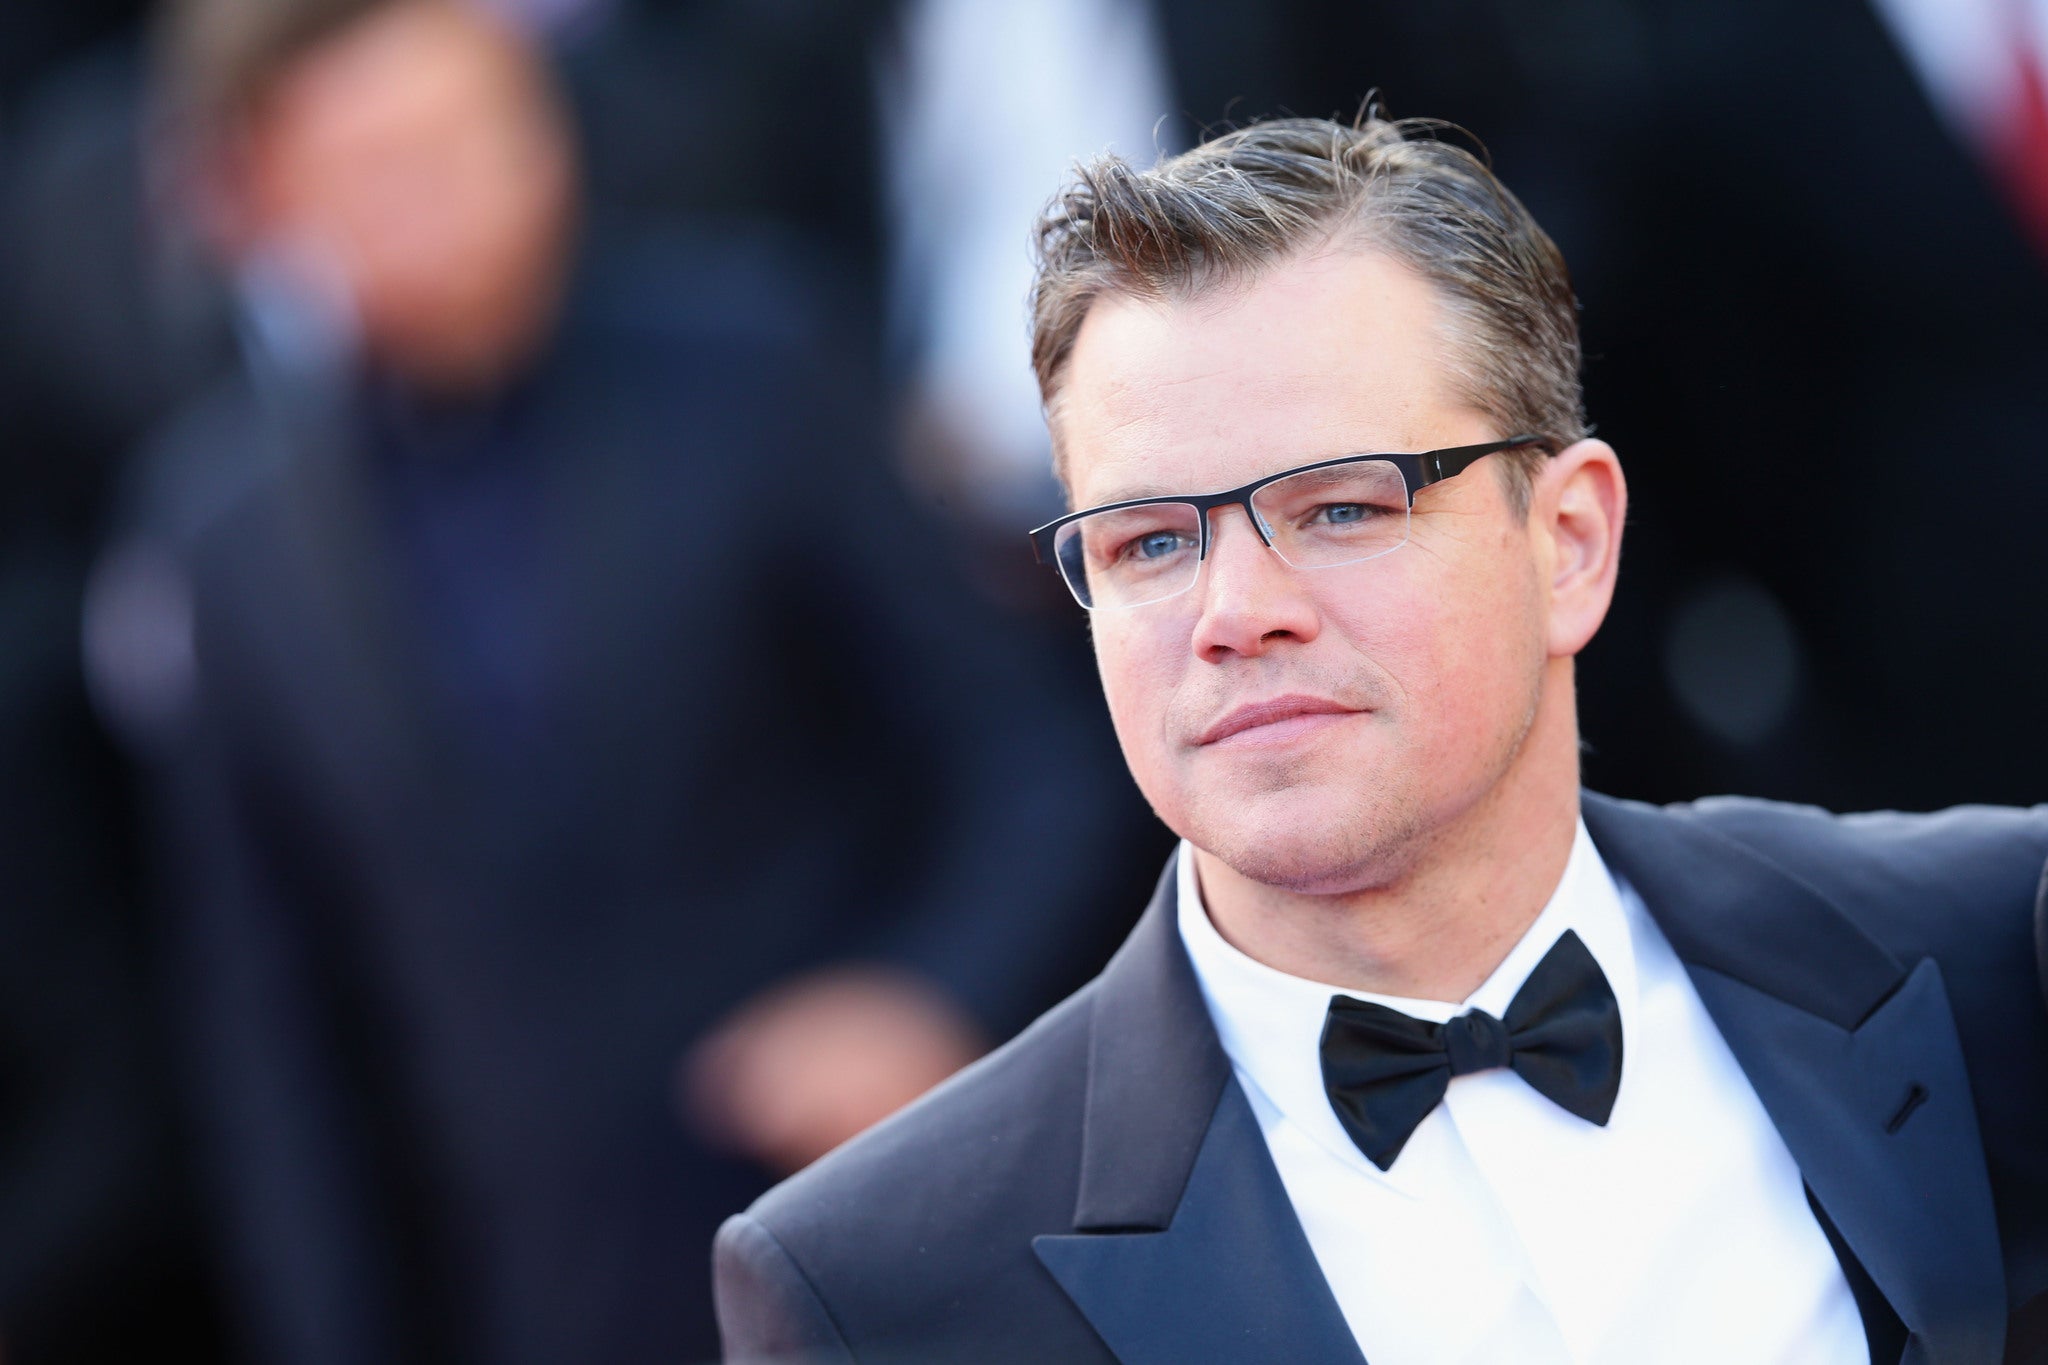 Matt Damon said using clean water in the ice bucket challenge "posed a problem" for him - so he used toilet water